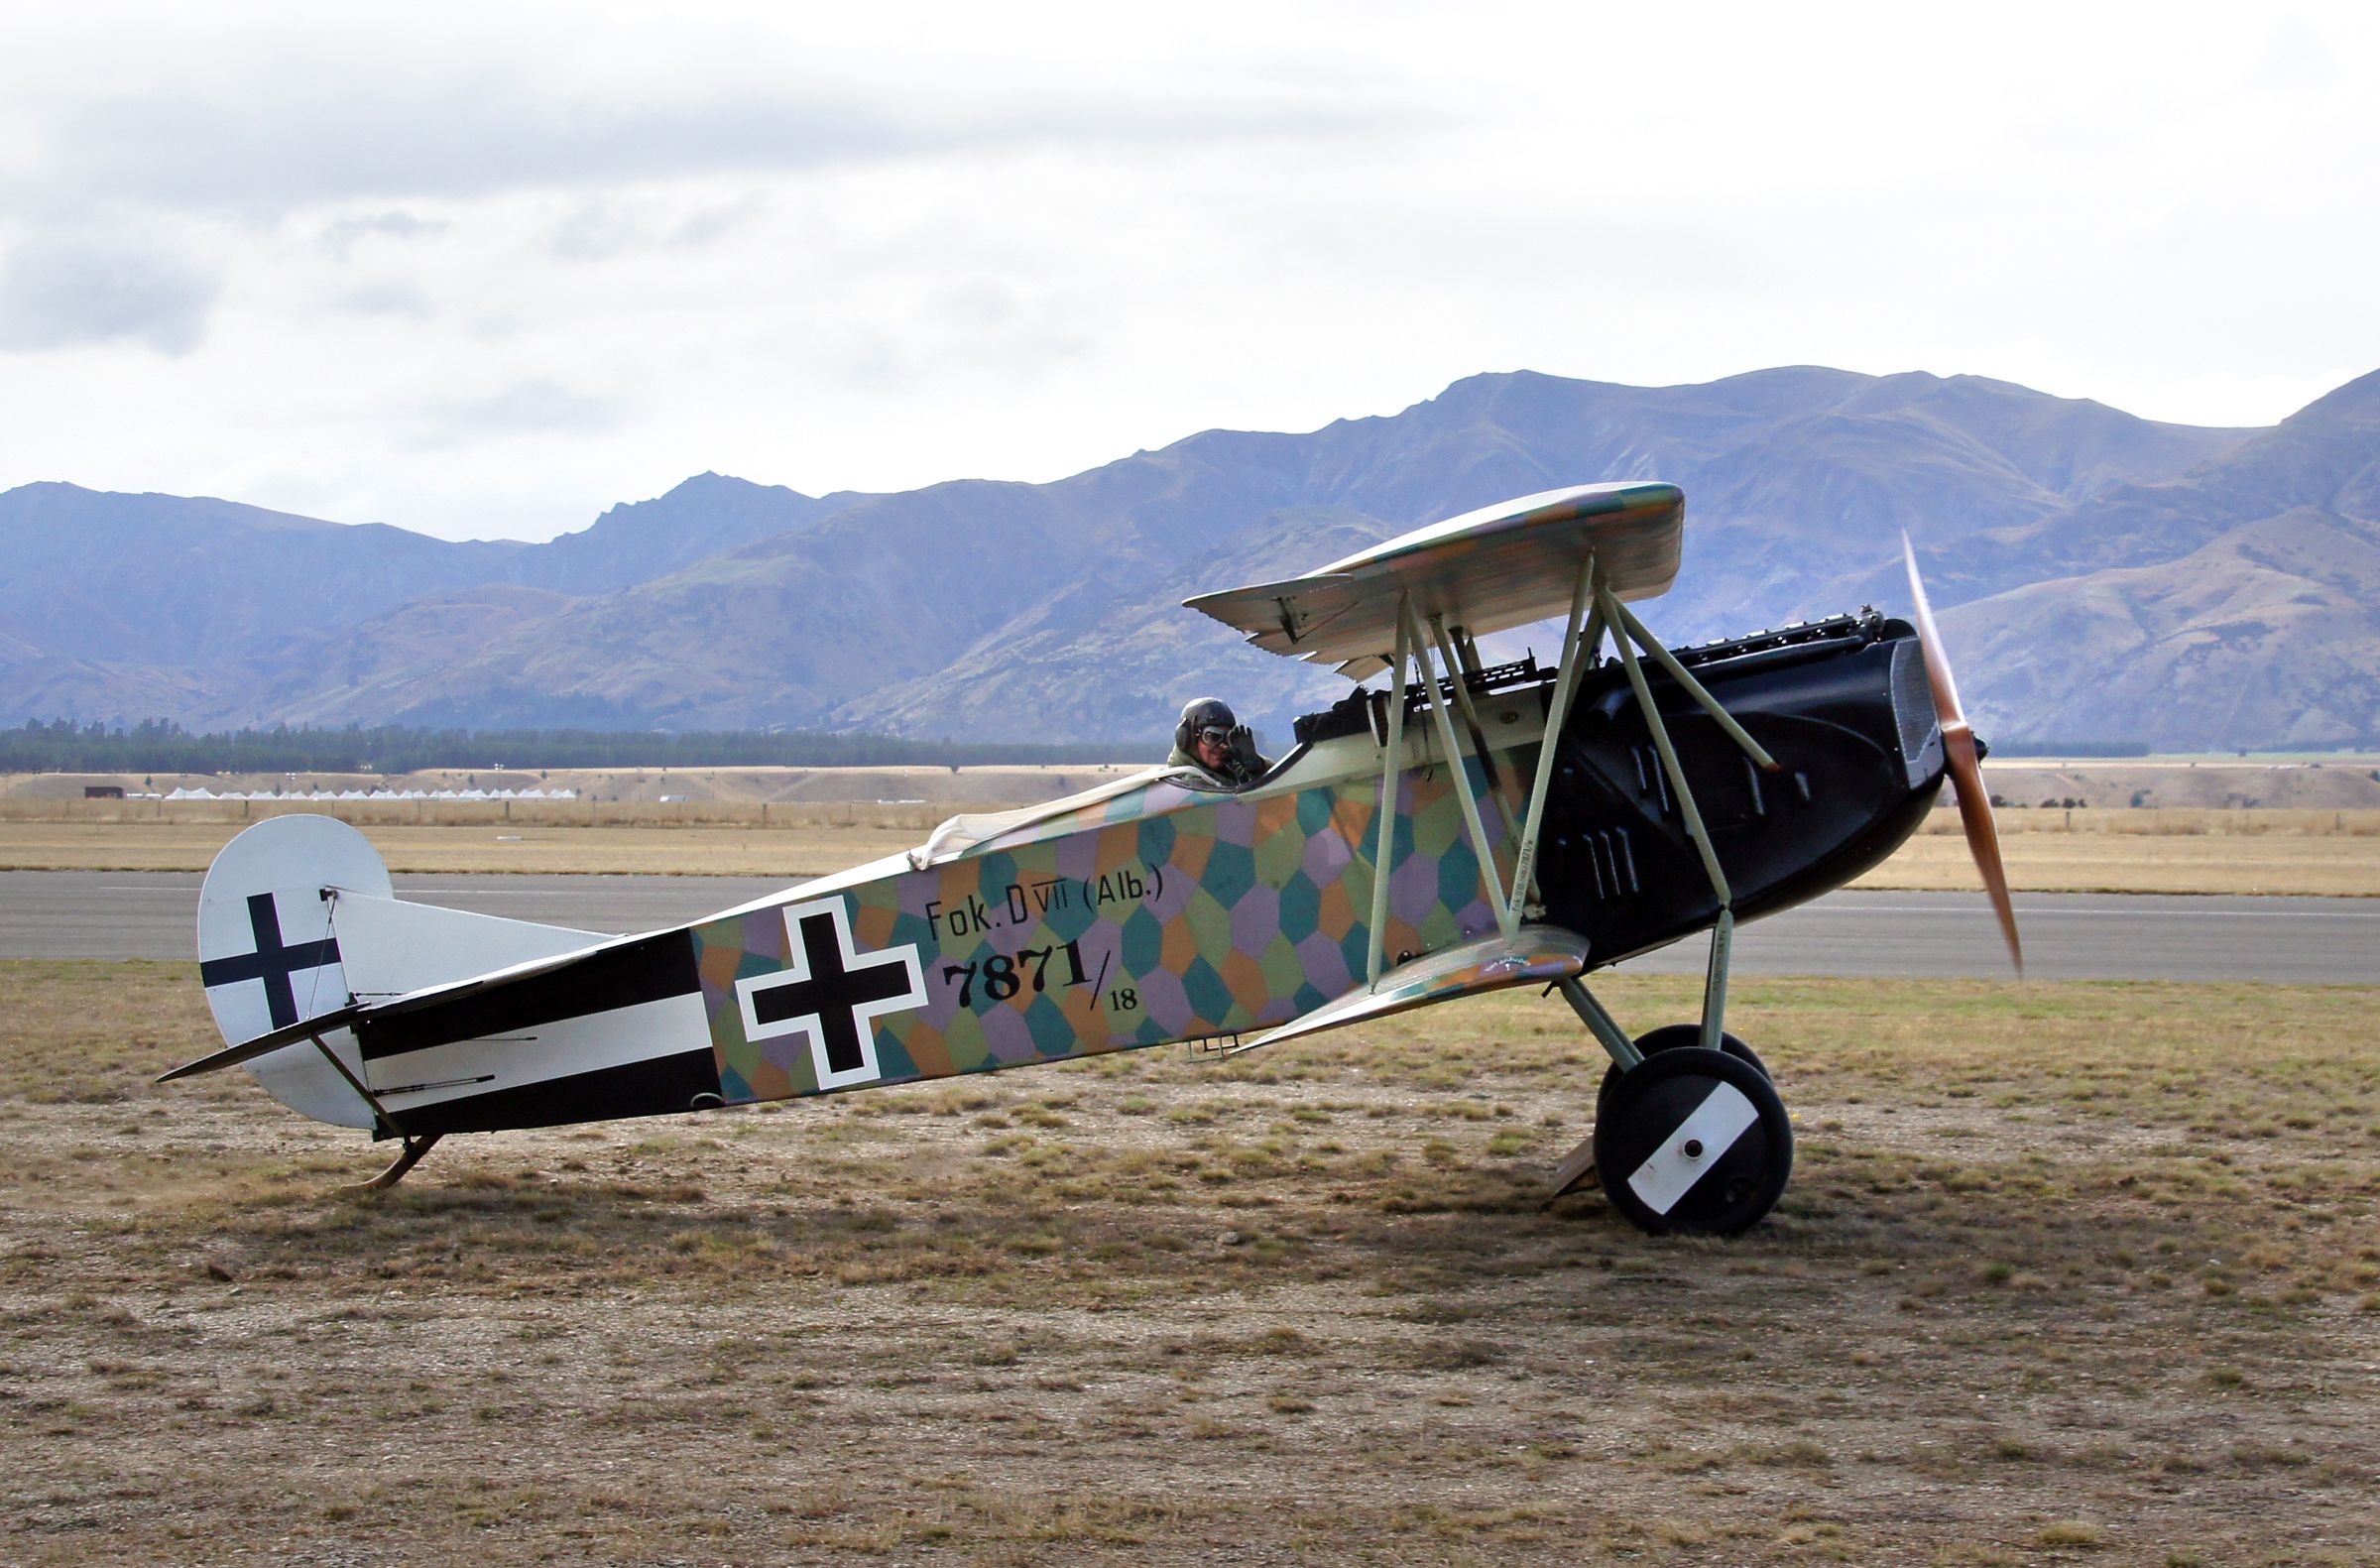 An old Fokker aircraft on display at an airfield.